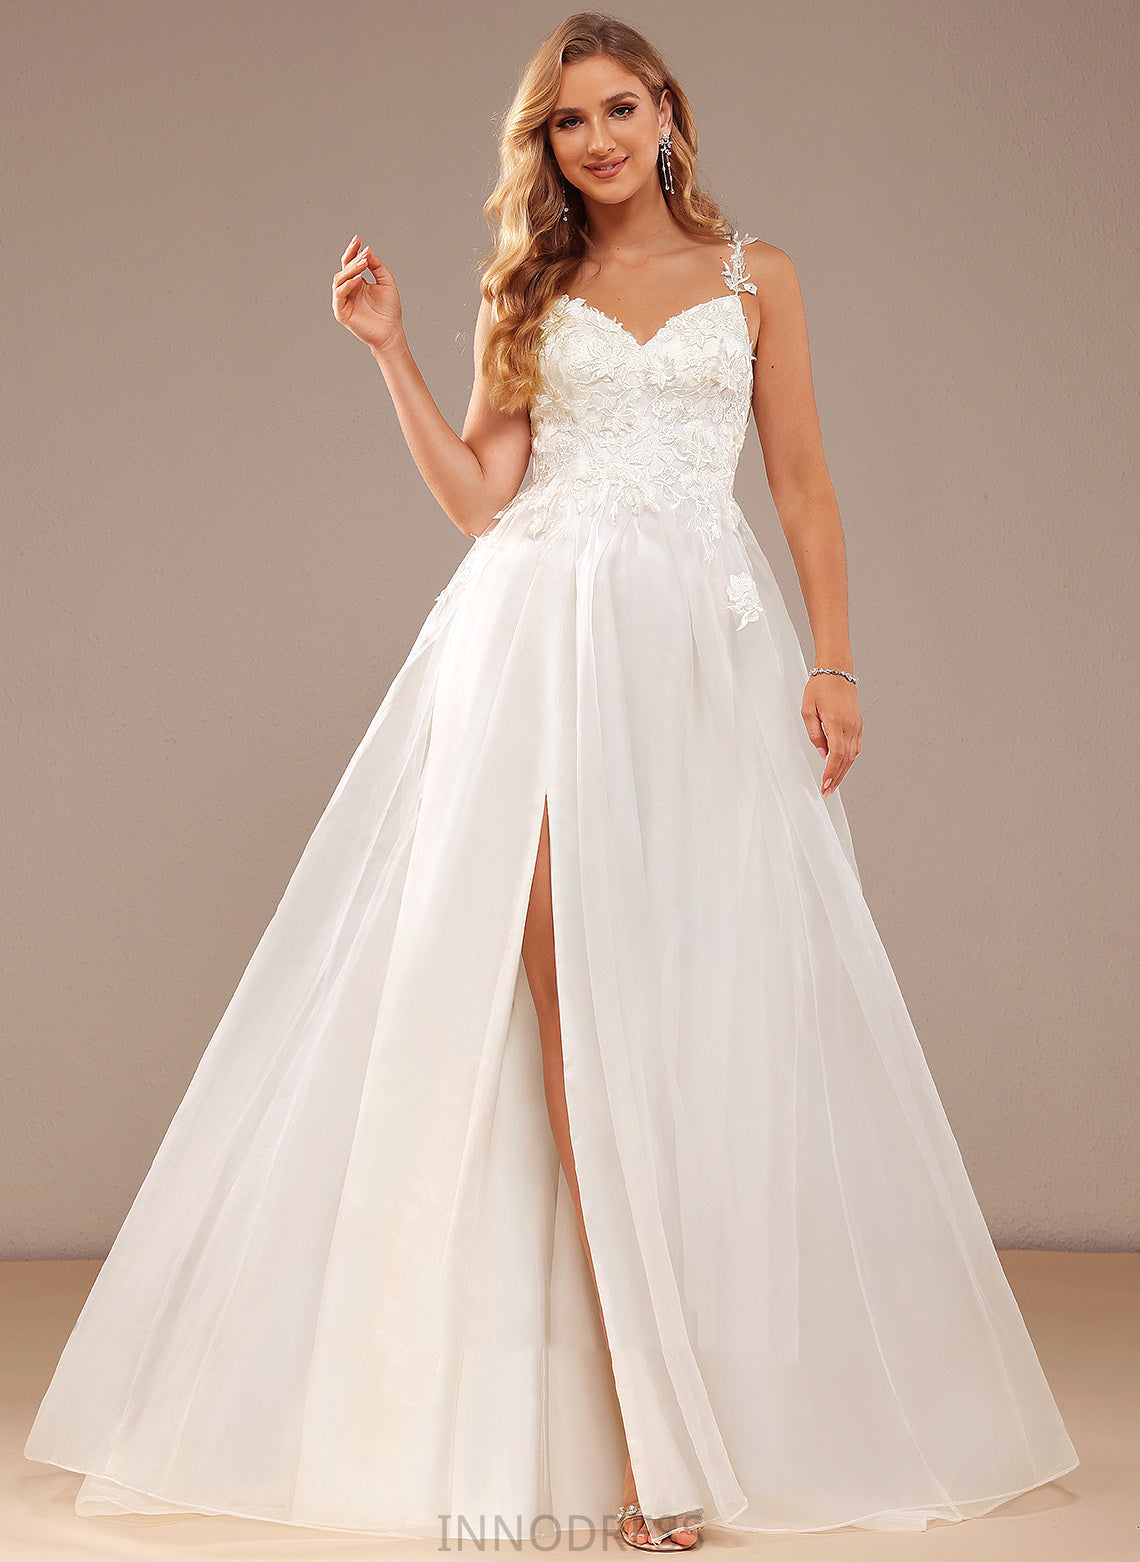 Dress Wedding Dresses Wedding Irene Front Court Split Organza Ball-Gown/Princess Lace Train With Lace V-neck